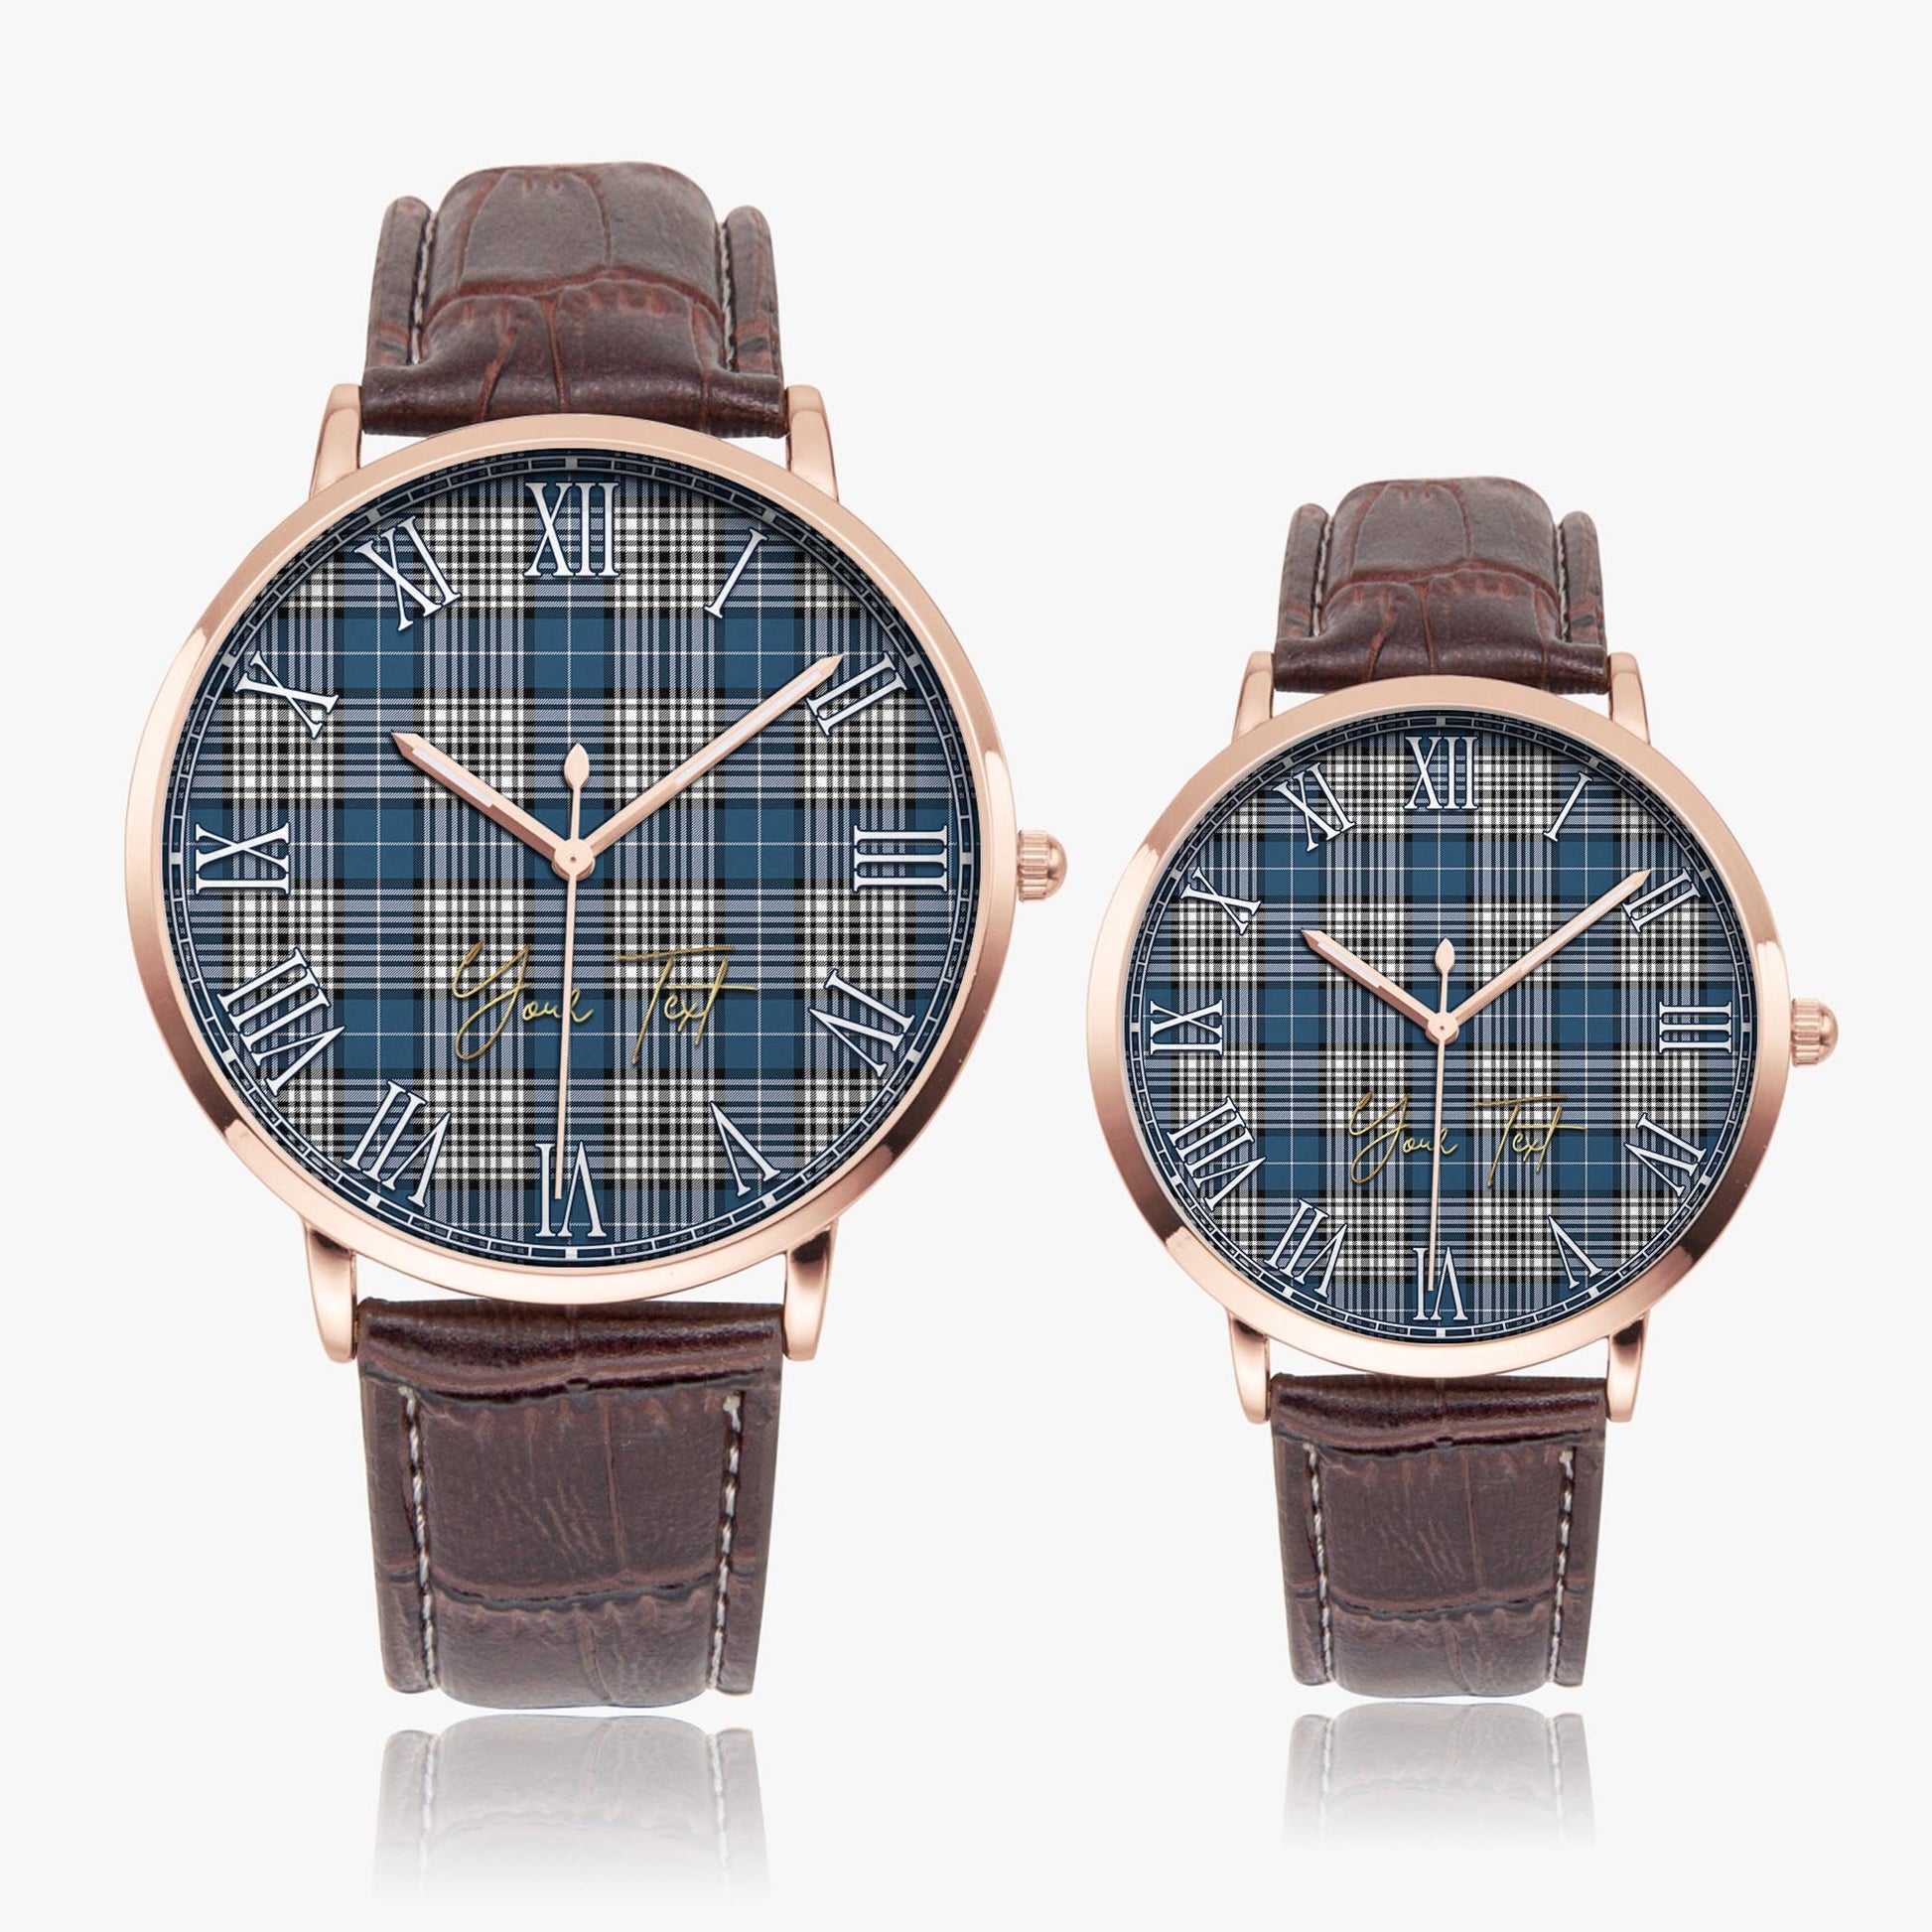 Napier Modern Tartan Personalized Your Text Leather Trap Quartz Watch Ultra Thin Rose Gold Case With Brown Leather Strap - Tartanvibesclothing